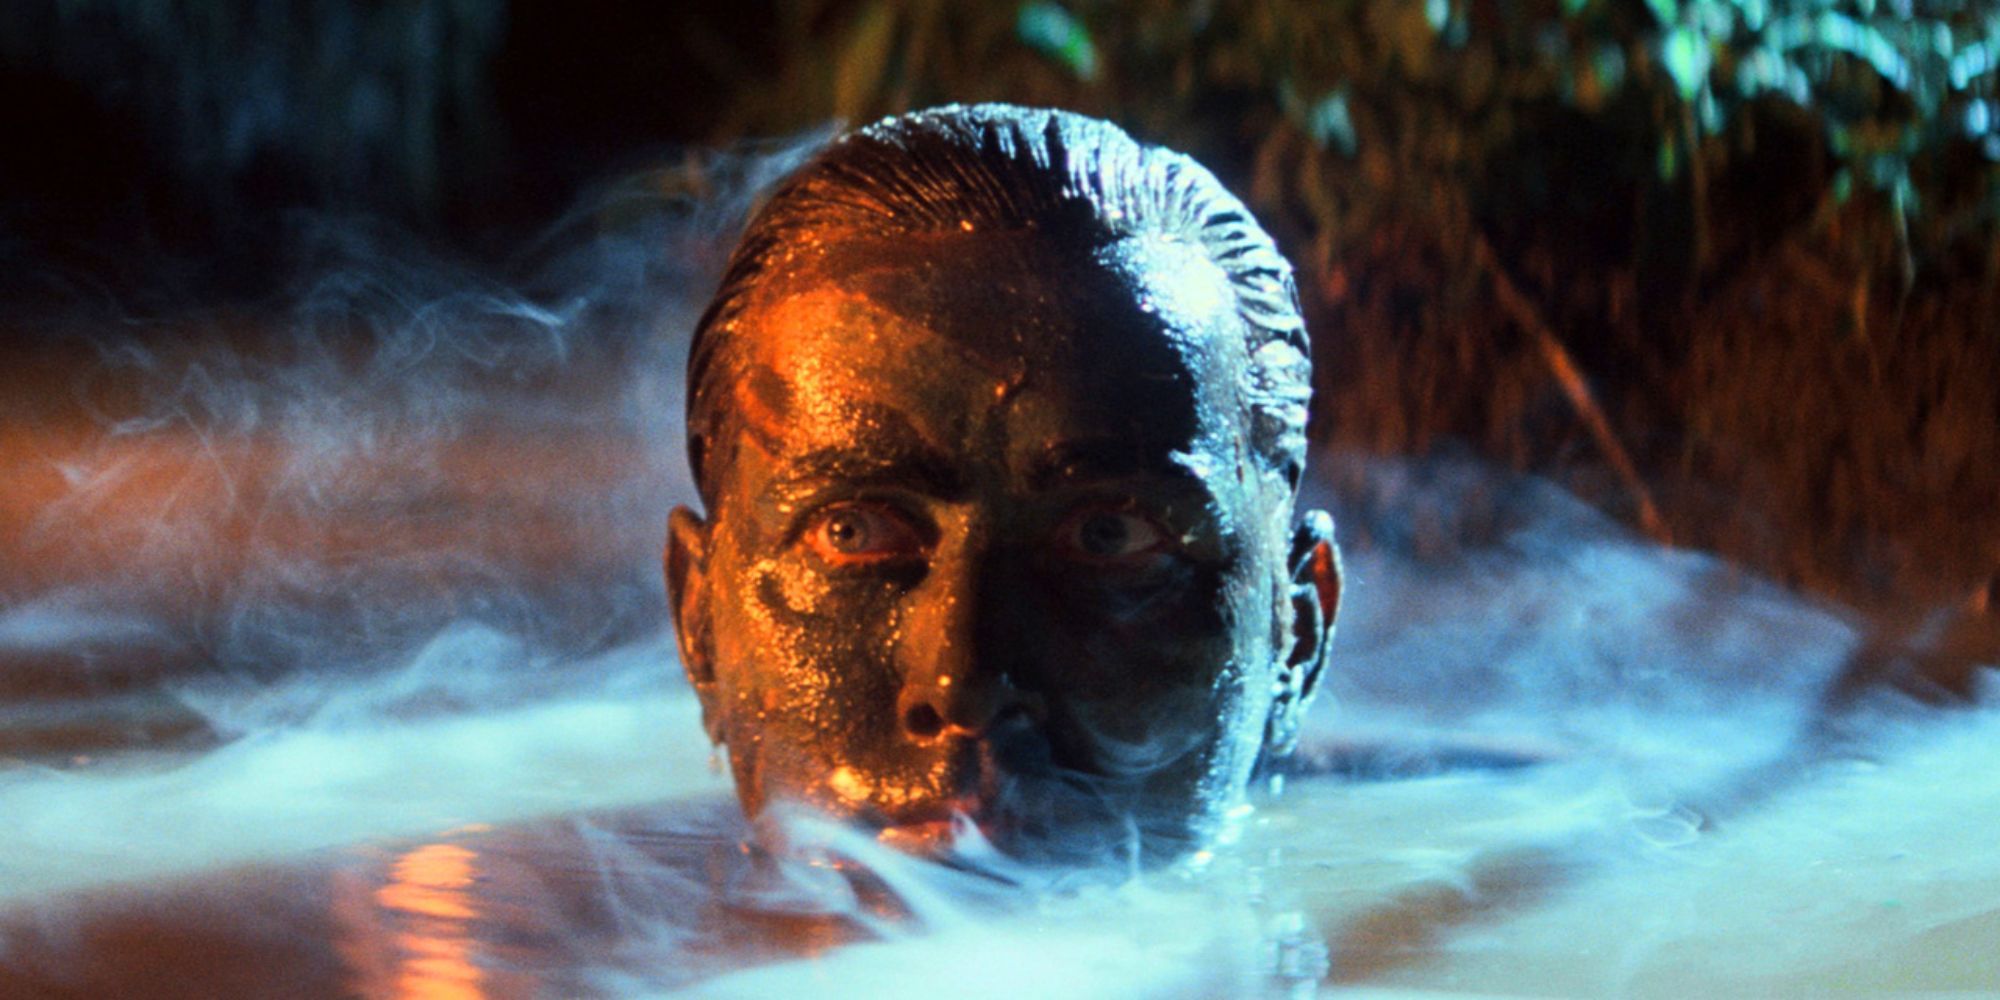 A man with camouflage paint on his face pokes his head out of the steaming water.